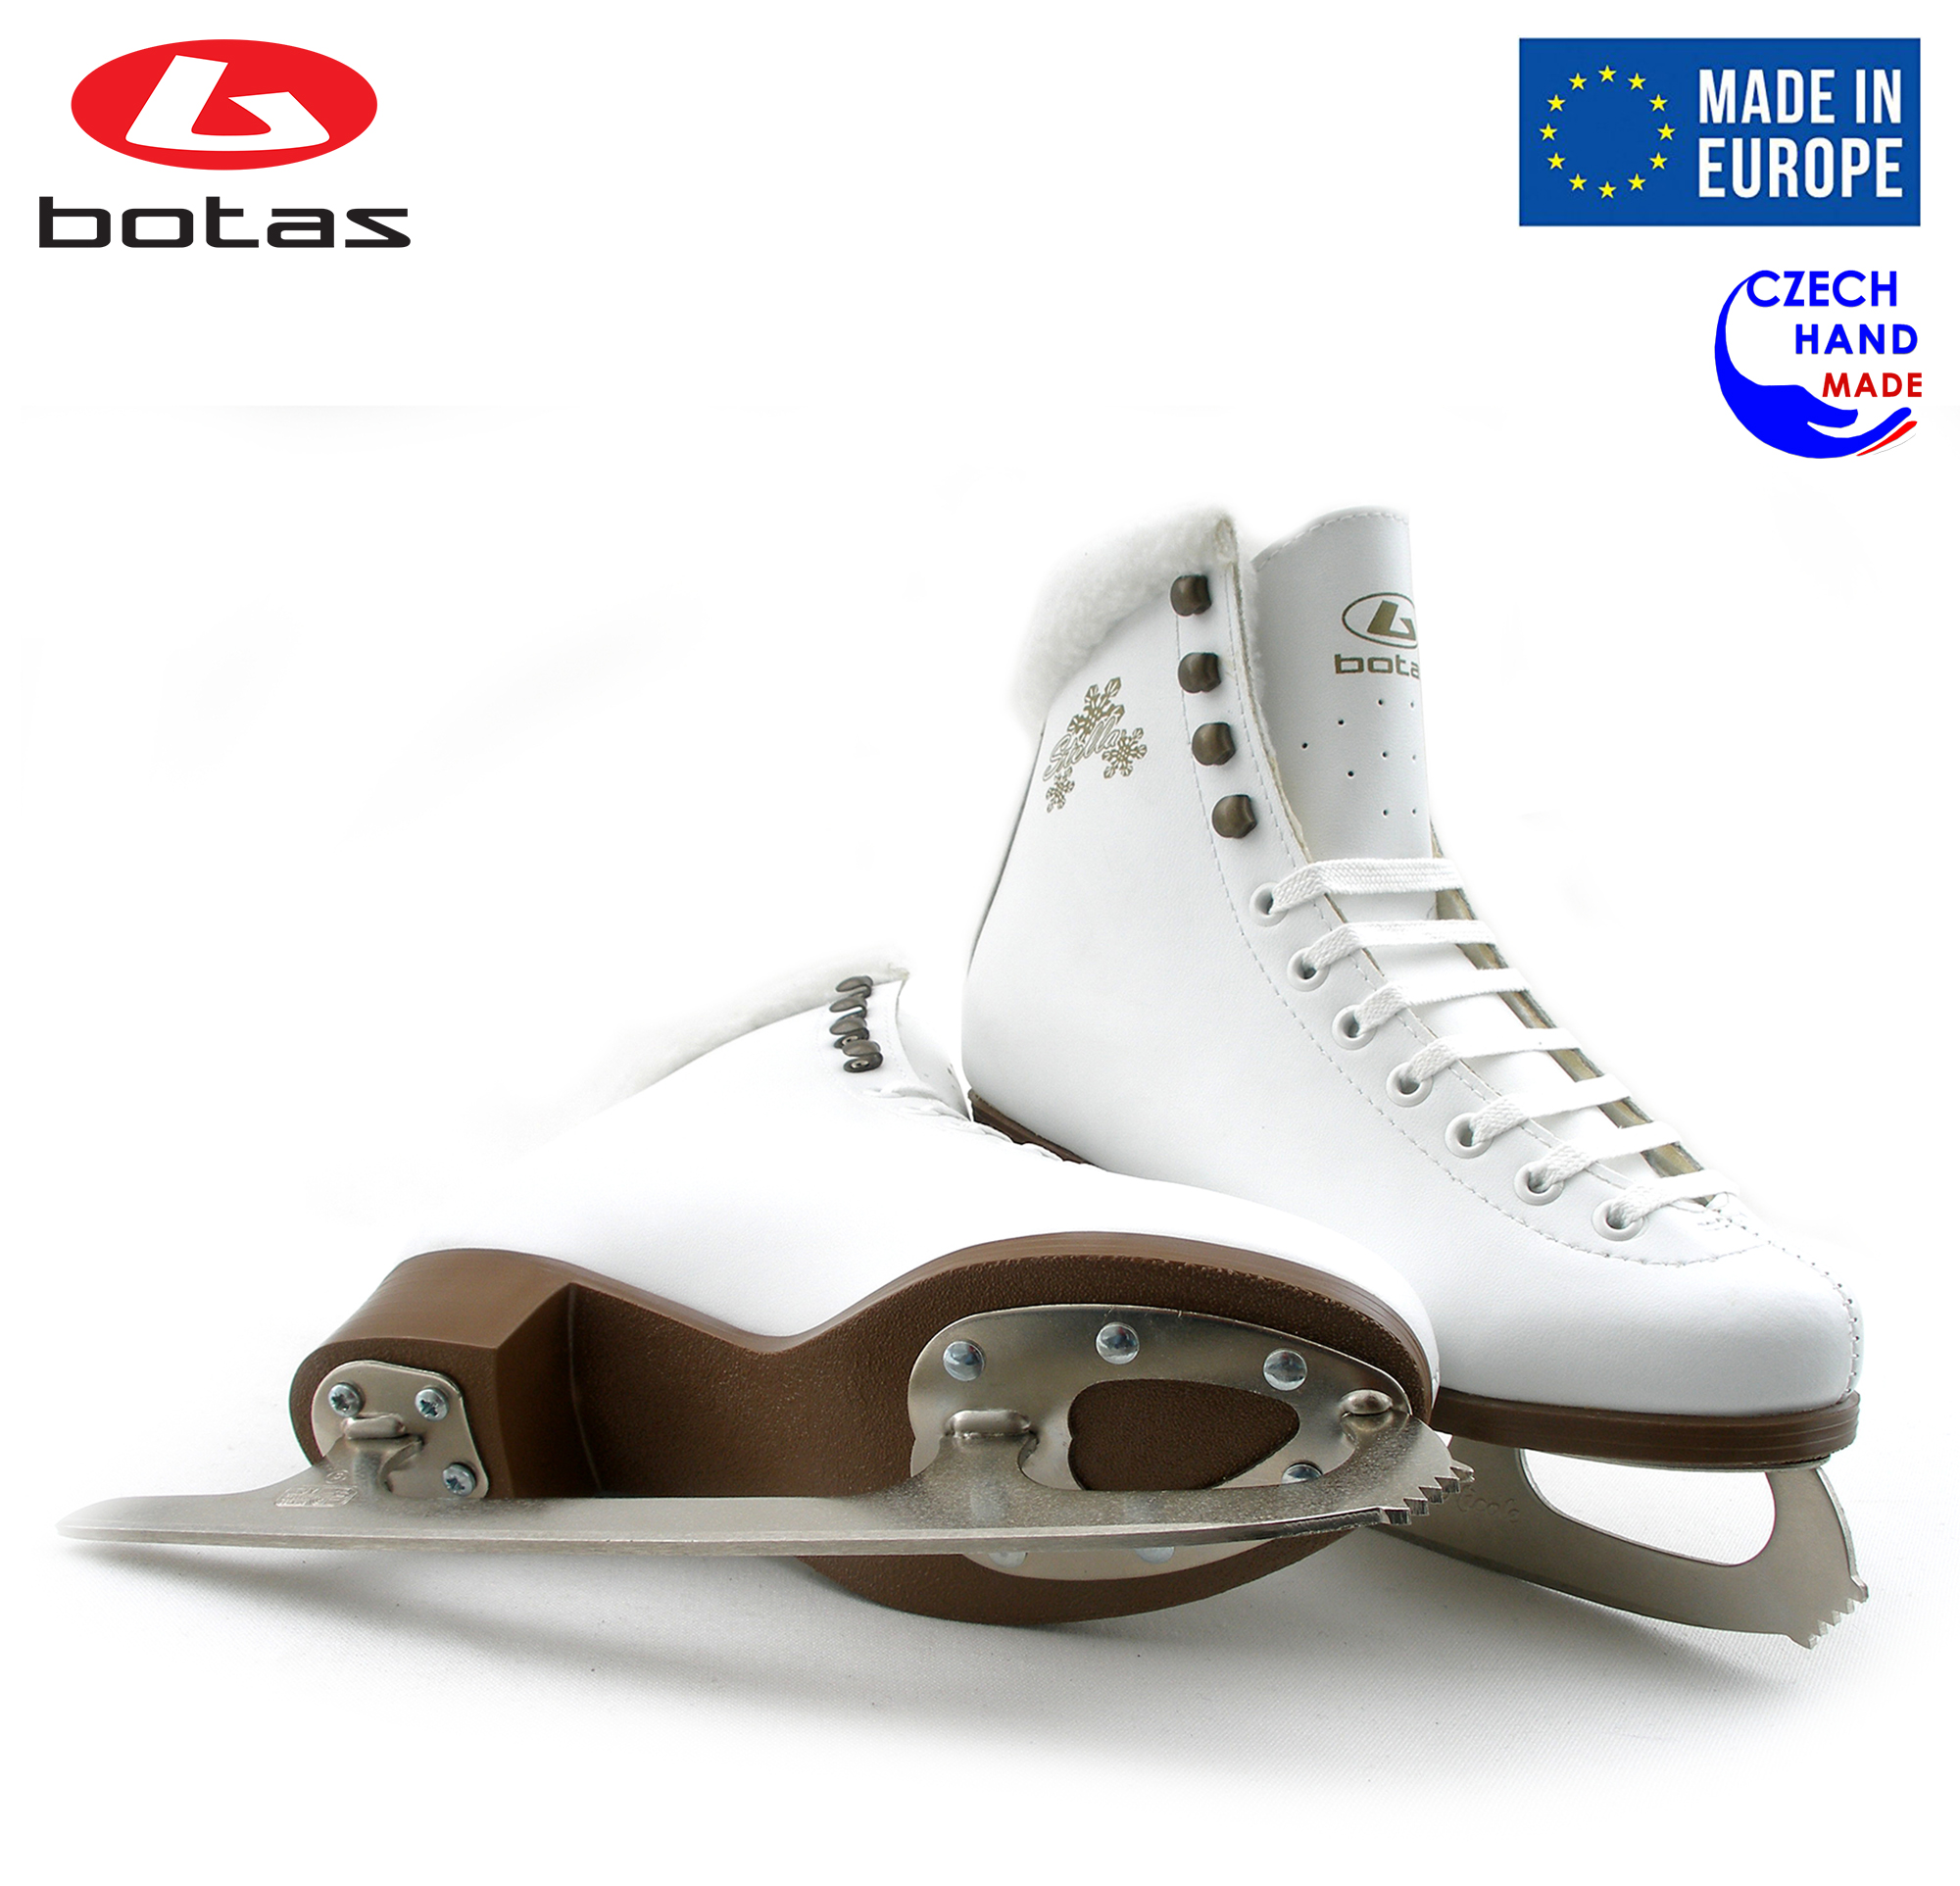 BOTAS - model: STELLA / Made in Europe (Czech Republic) / Innovated Elegant Figure Ice Skates for Girls, Kids / with Plush Collar / NICOLE blades / Color: White, Size: Kids 11 - image 2 of 6